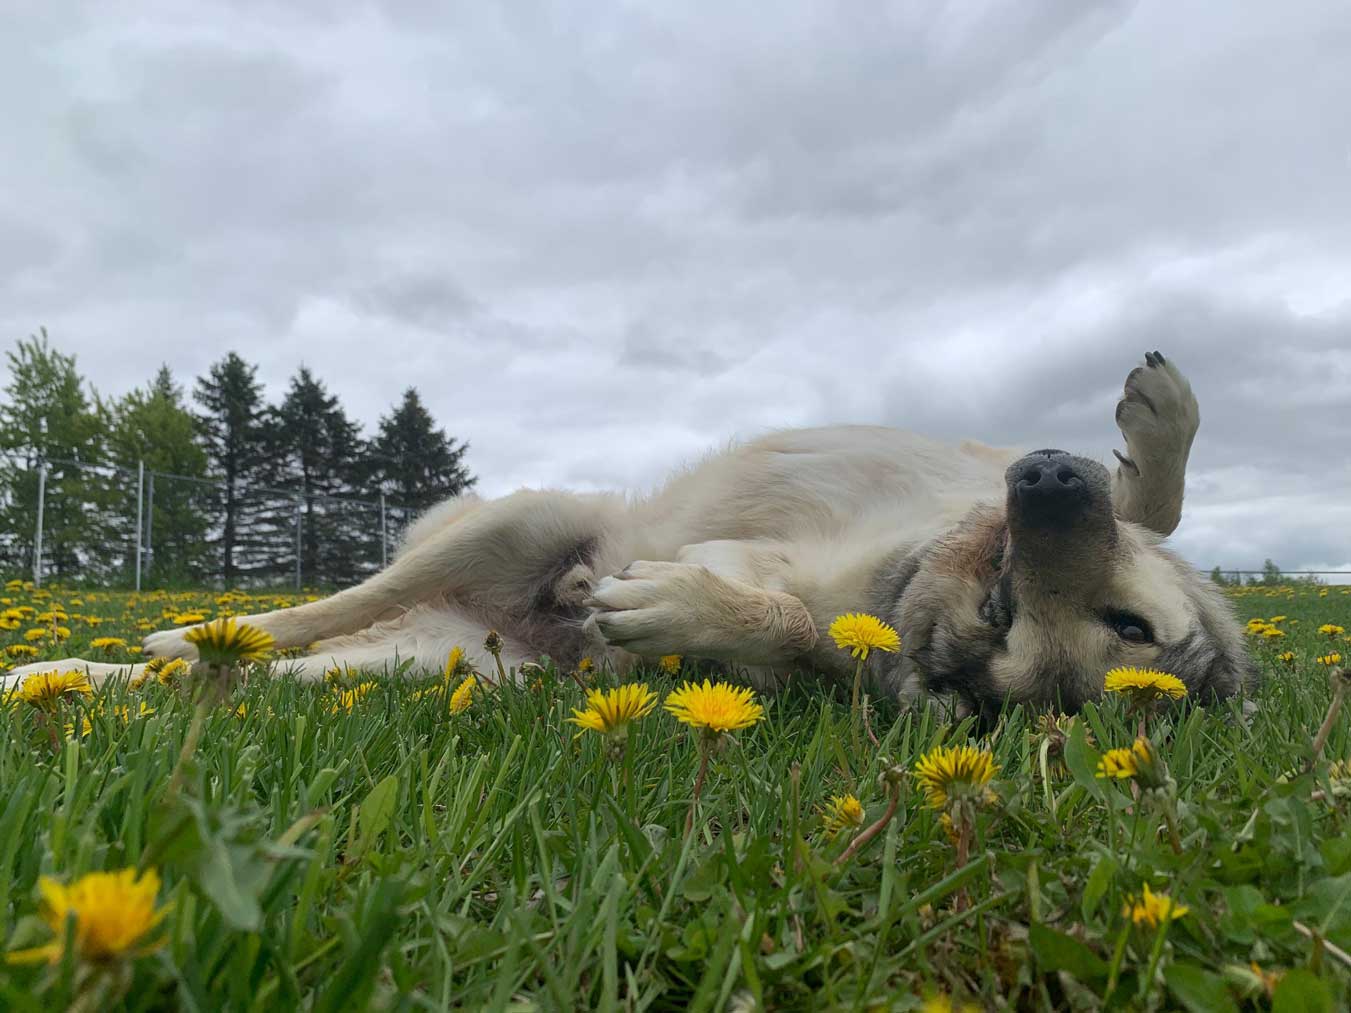 Raha rolls in the dandelions last year.   We're sad that he will miss spring this year but where he is the flowers are brighter and the grass smells sweet